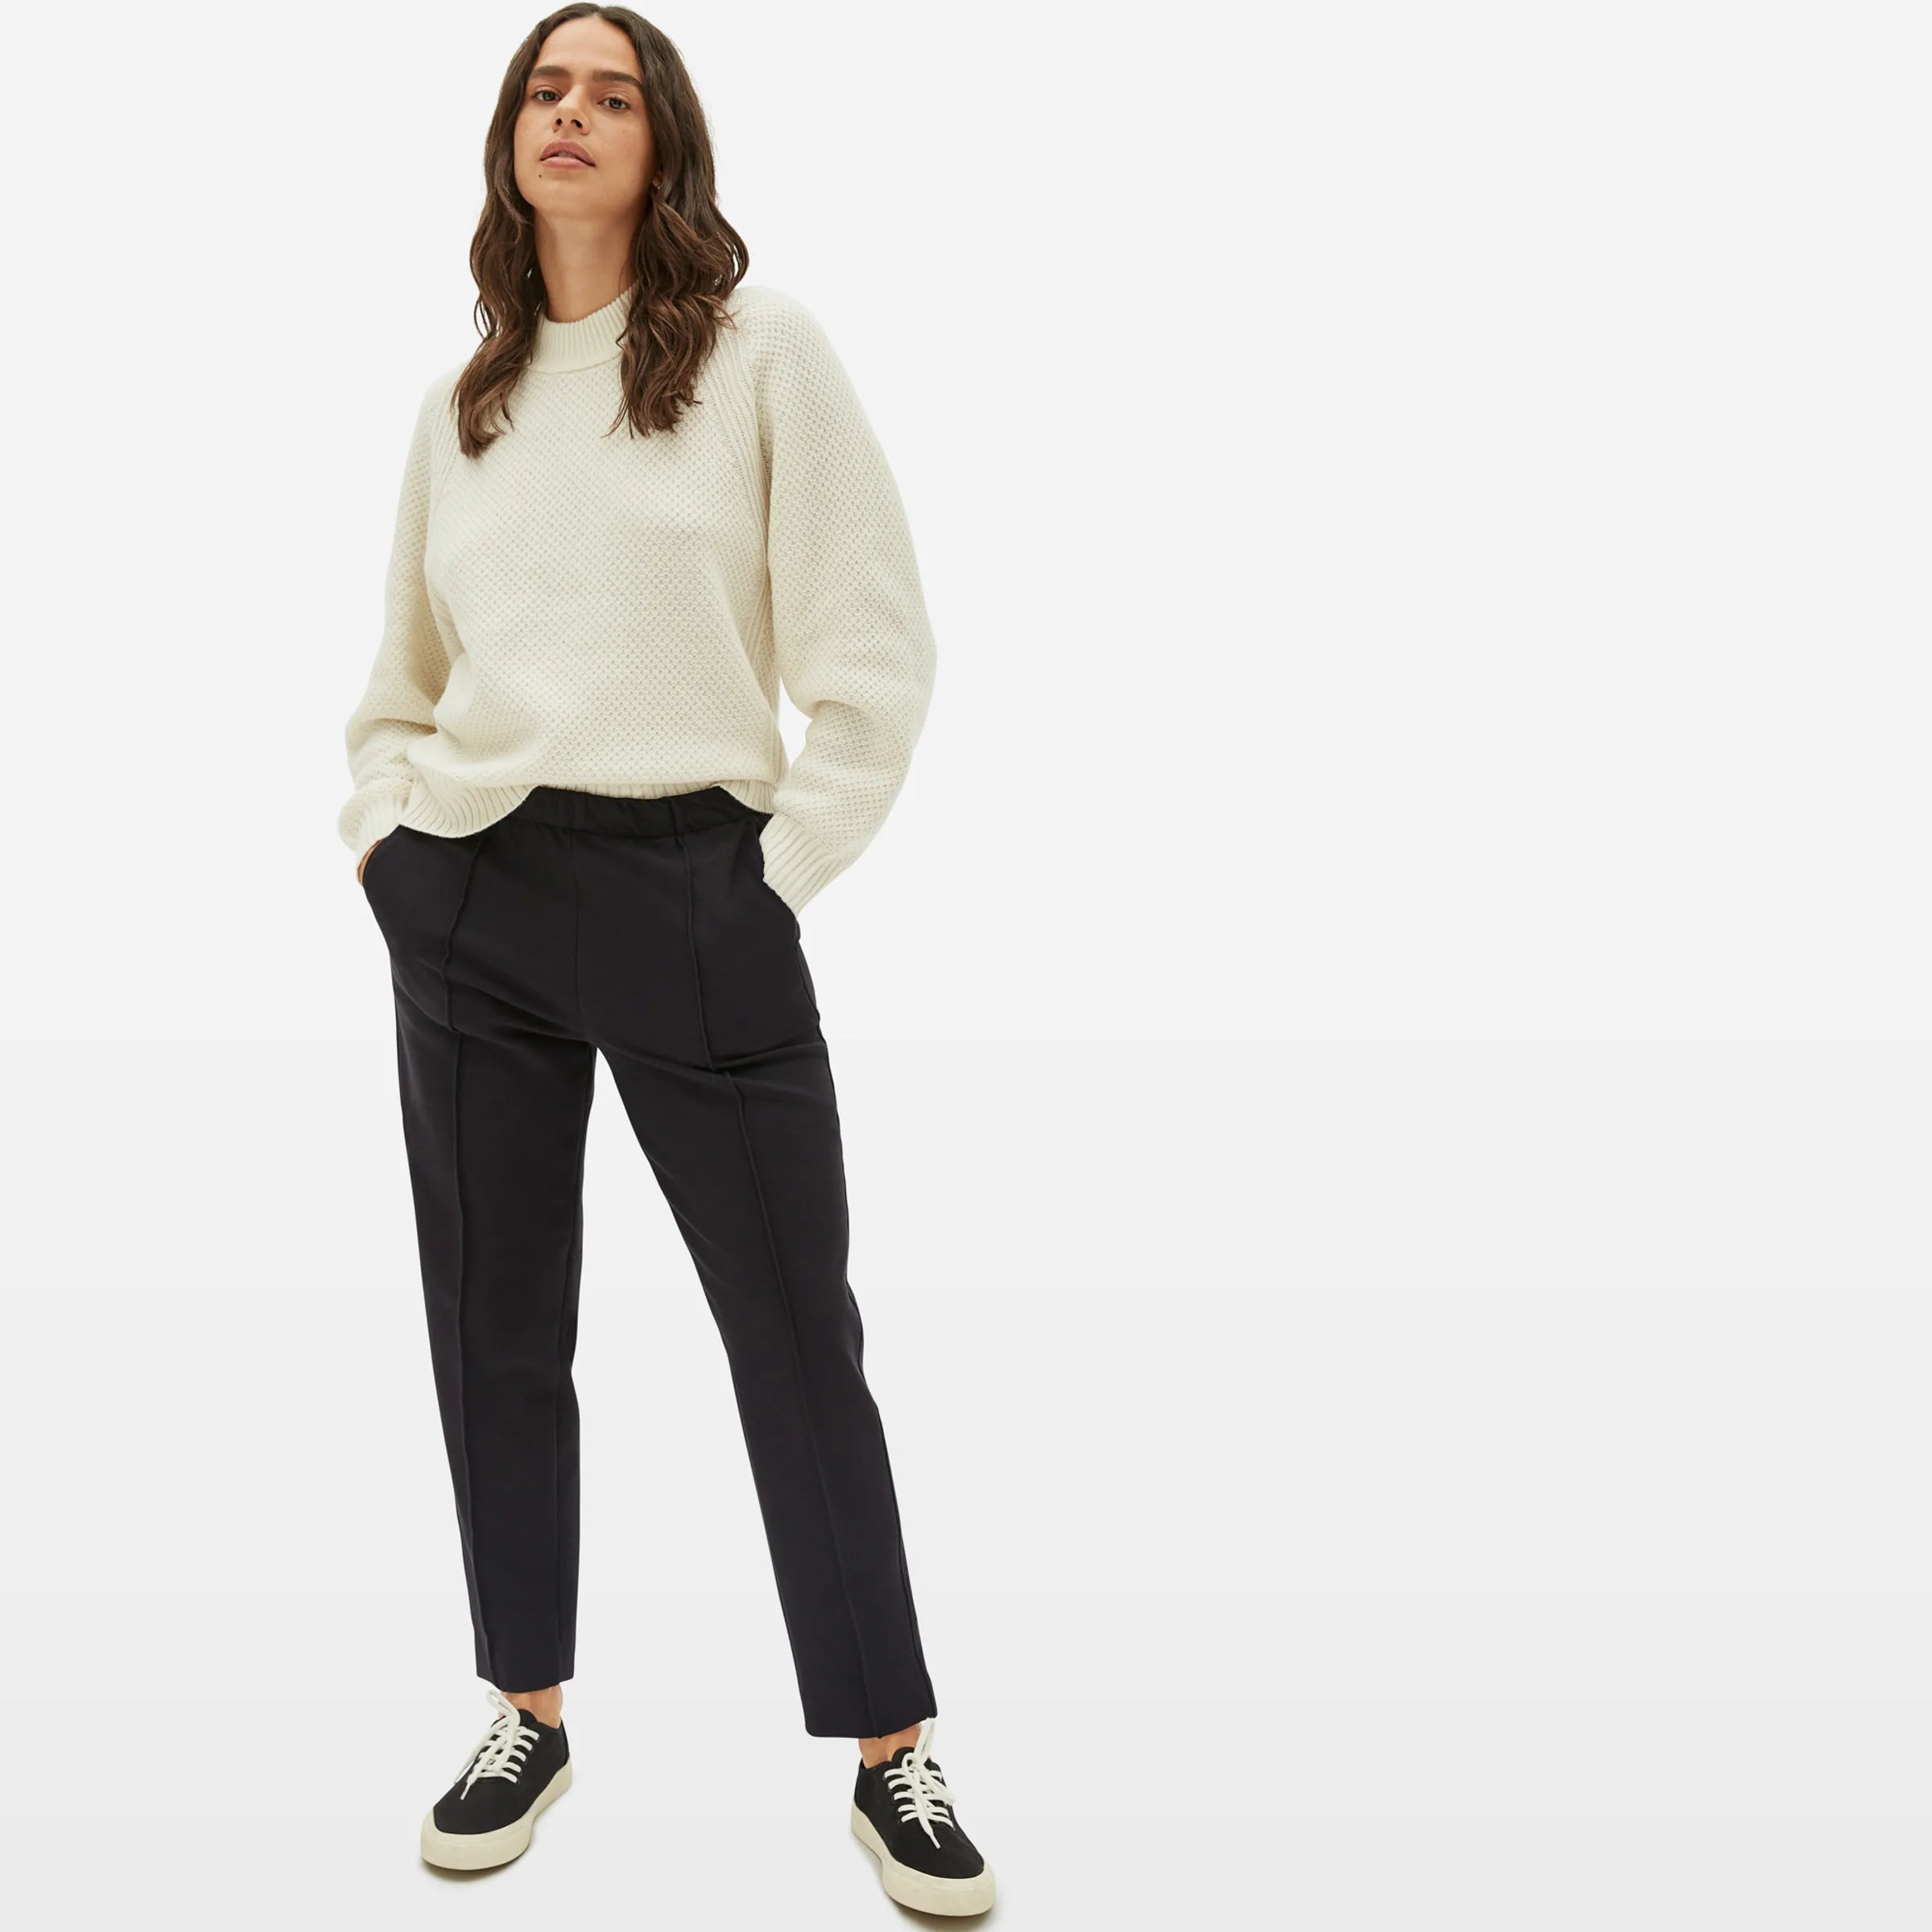 Everlane Review: Wide Leg Crop & Straight Leg Crop - Welcome Objects